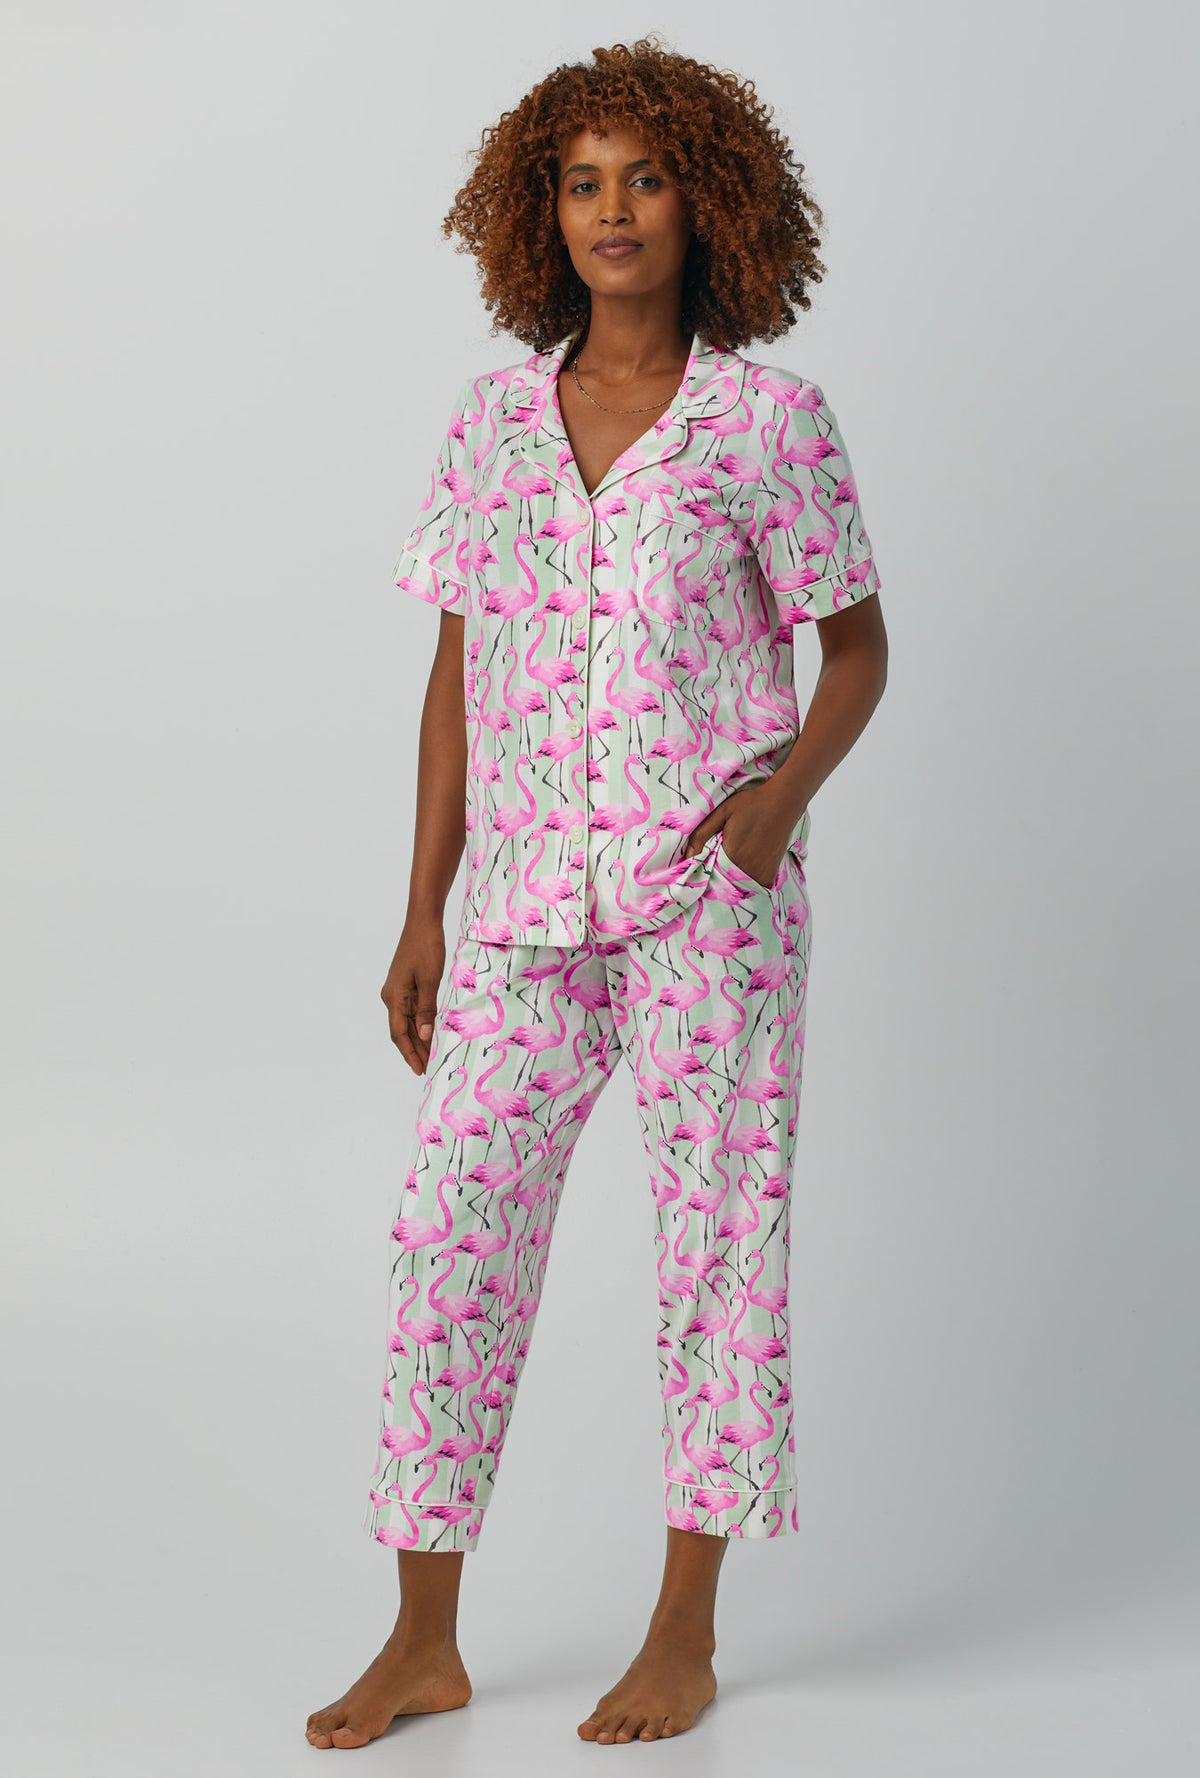 A lady wearing pink Short Sleeve Classic Stretch Jersey Cropped PJ Set with Flamingo Bay print